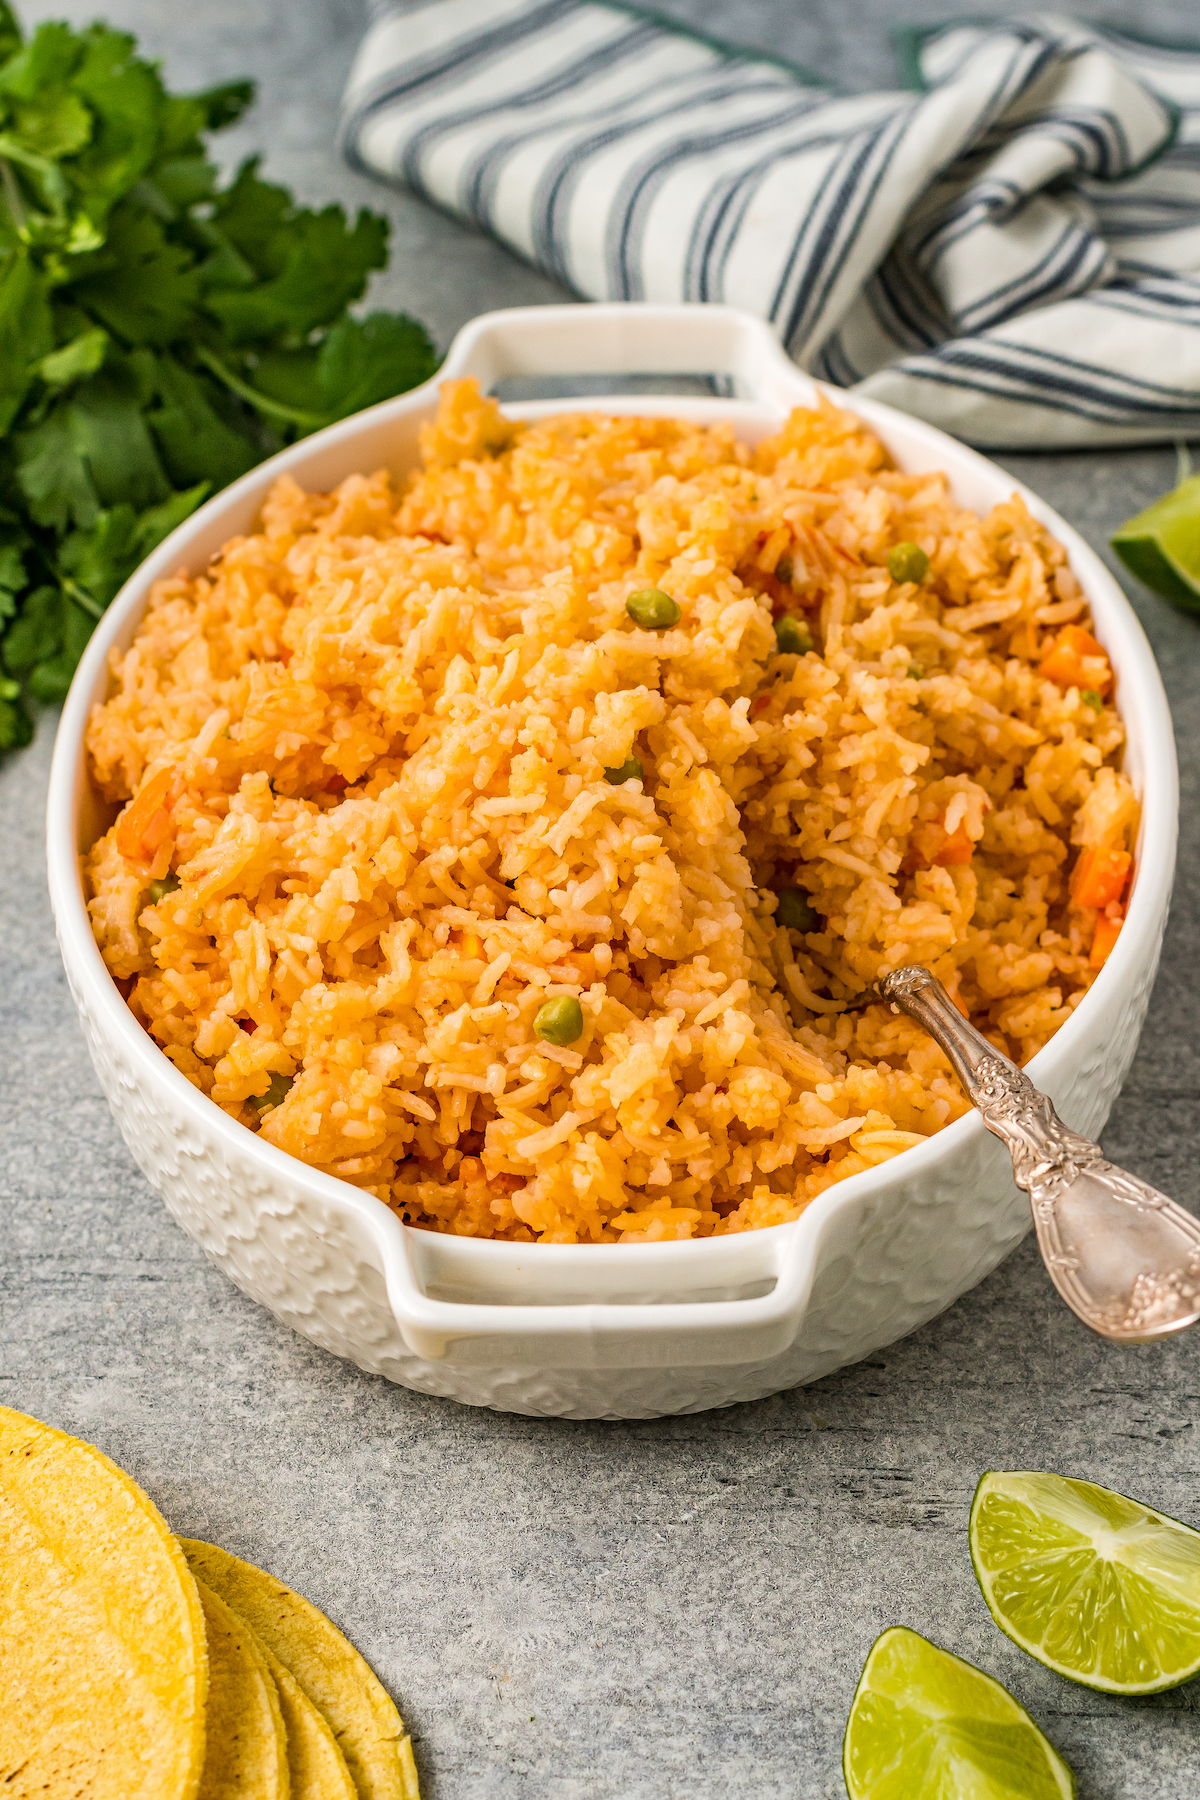 A casserole dish filled with seasoned rice. A spoon is stuck into the rice.